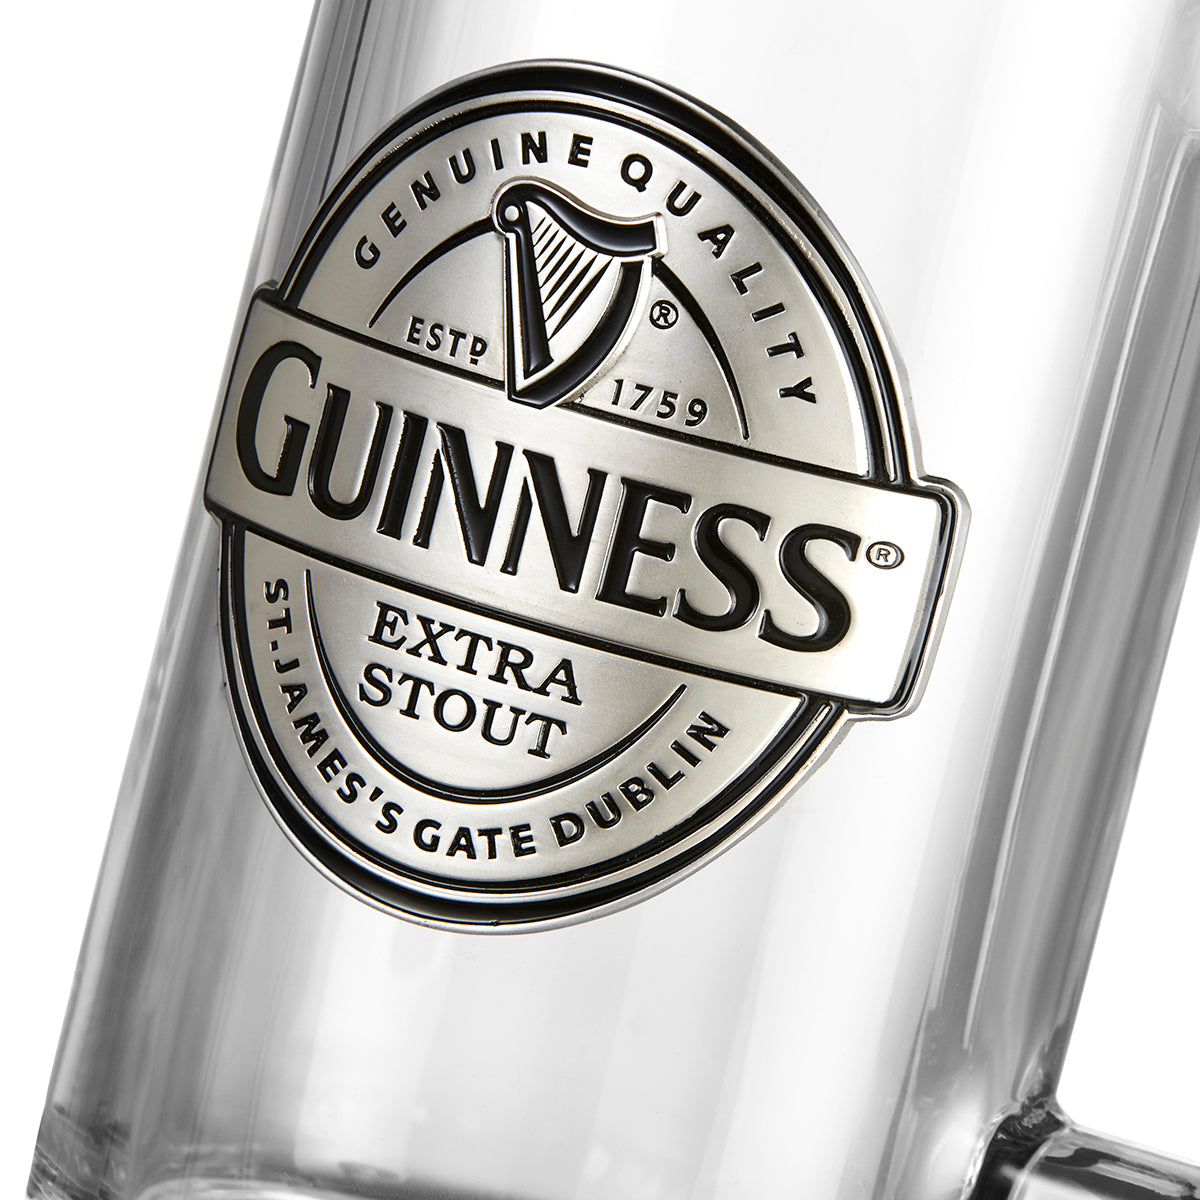 Guinness Pewter Logo Tankard featuring the iconic logo.